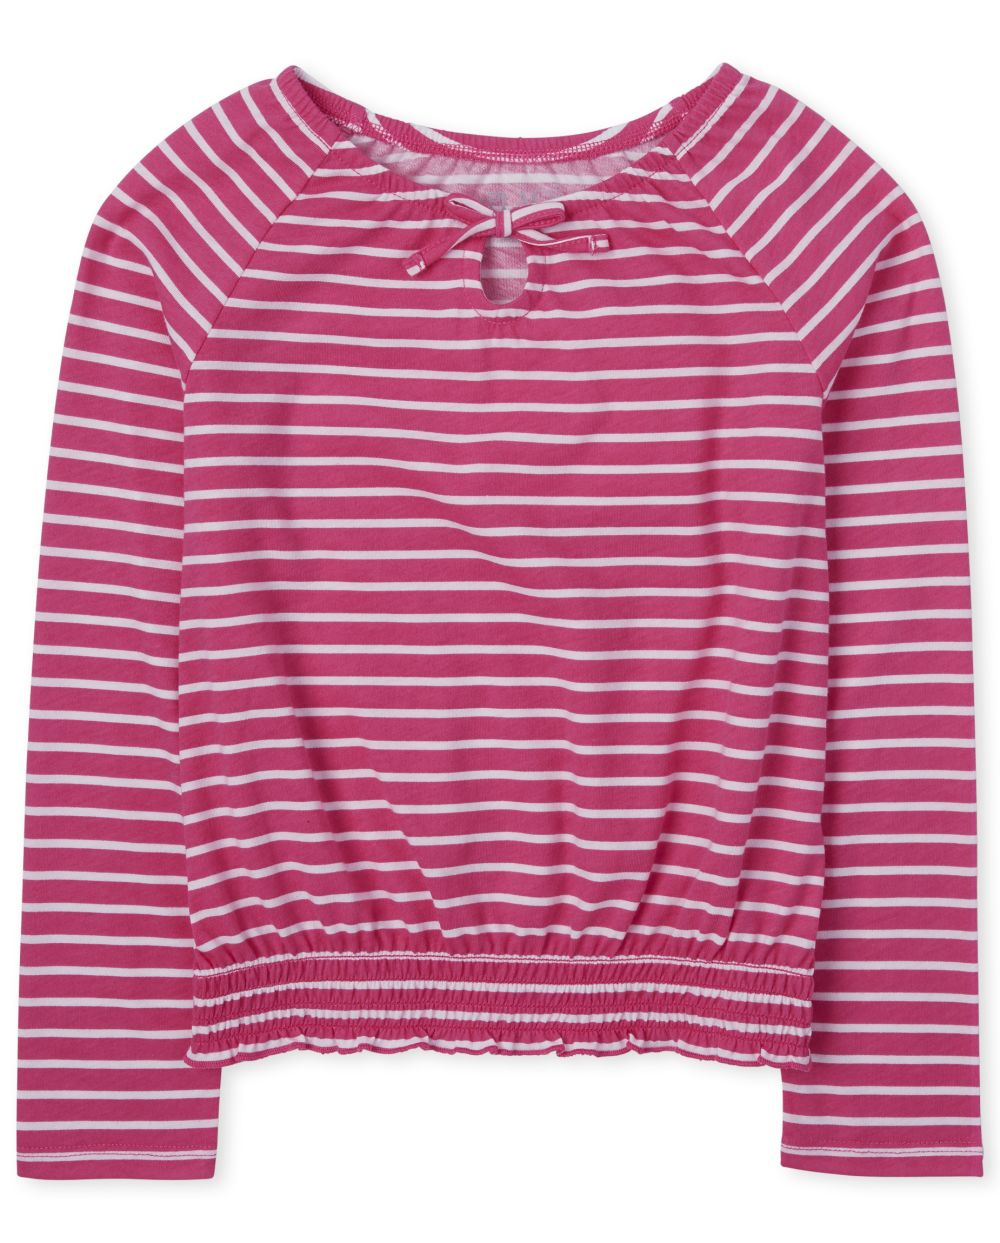 

Girls Striped Smocked Peasant Top - Pink - The Children's Place